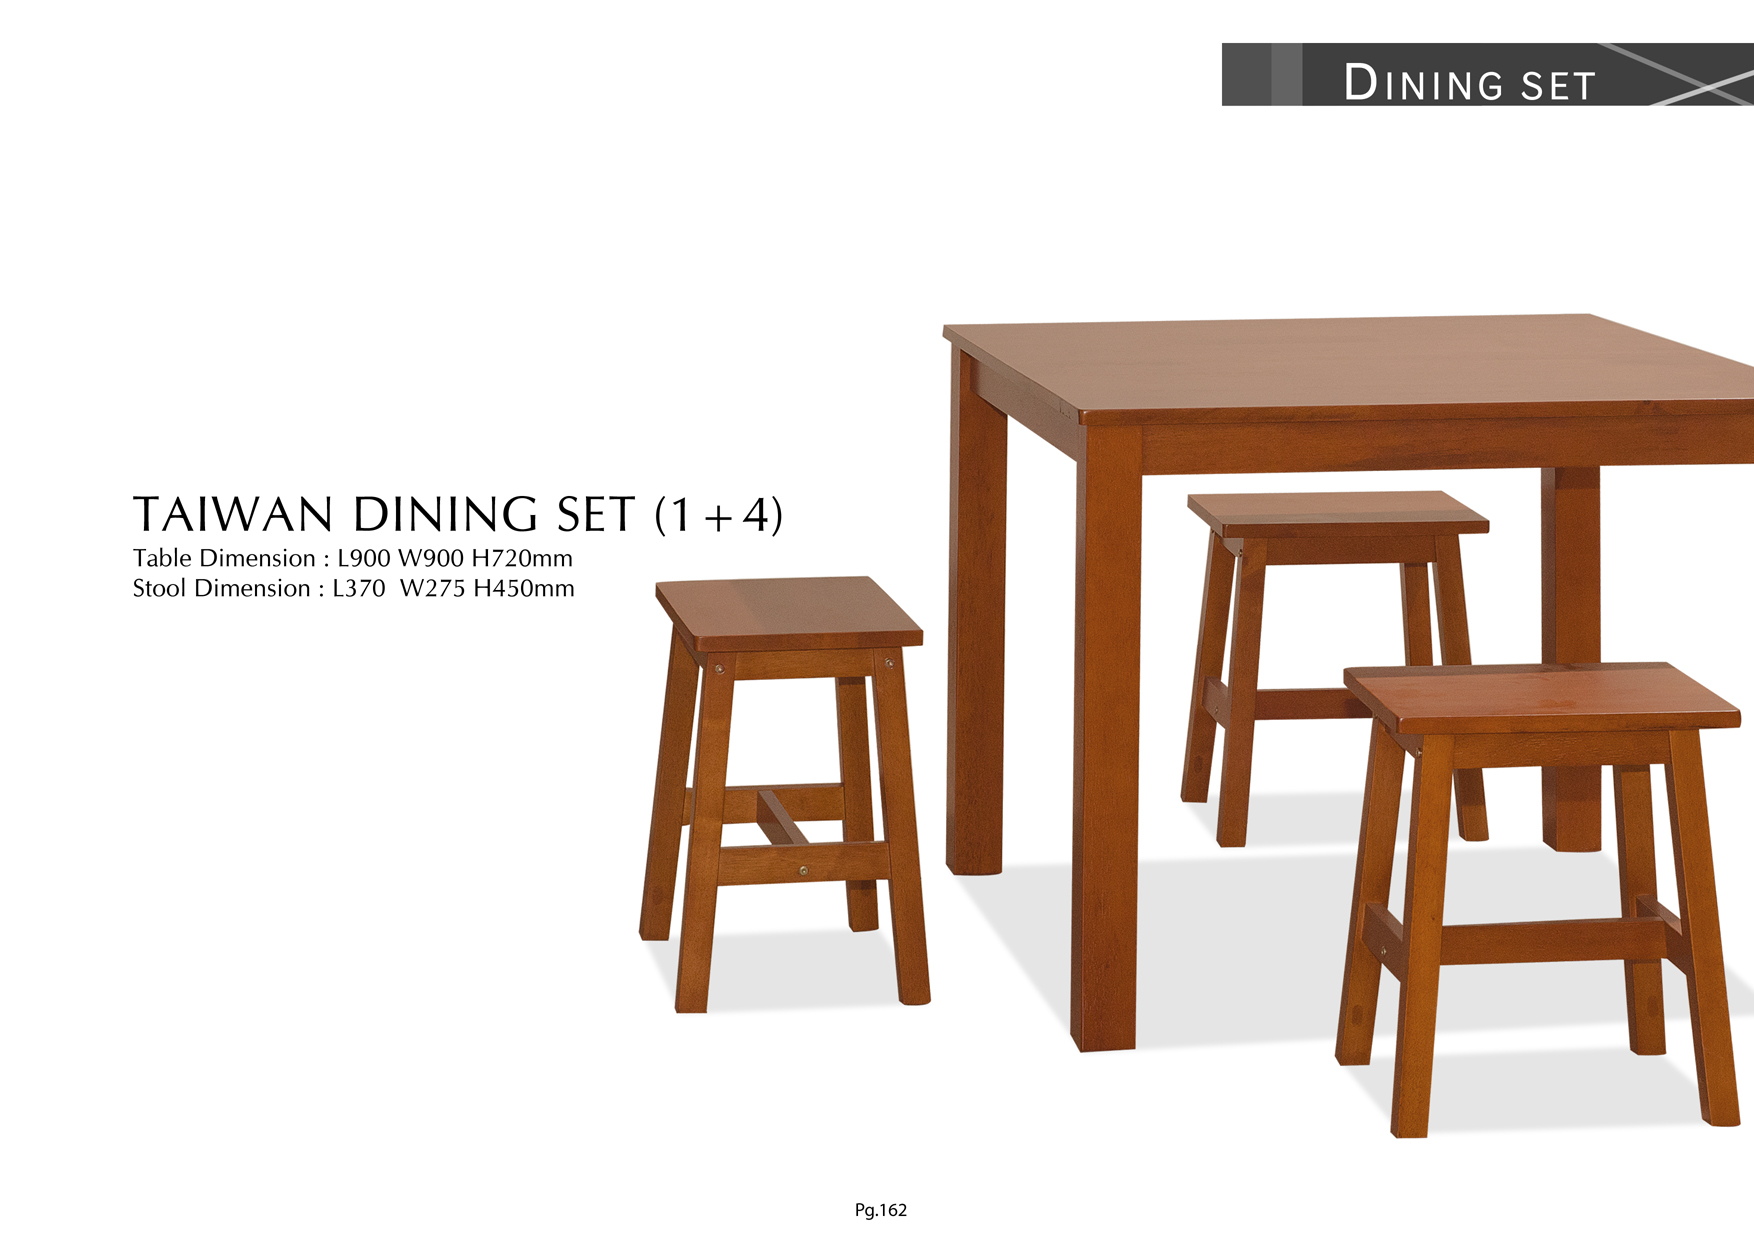 Product: PG162. TAIWAN DINING SET